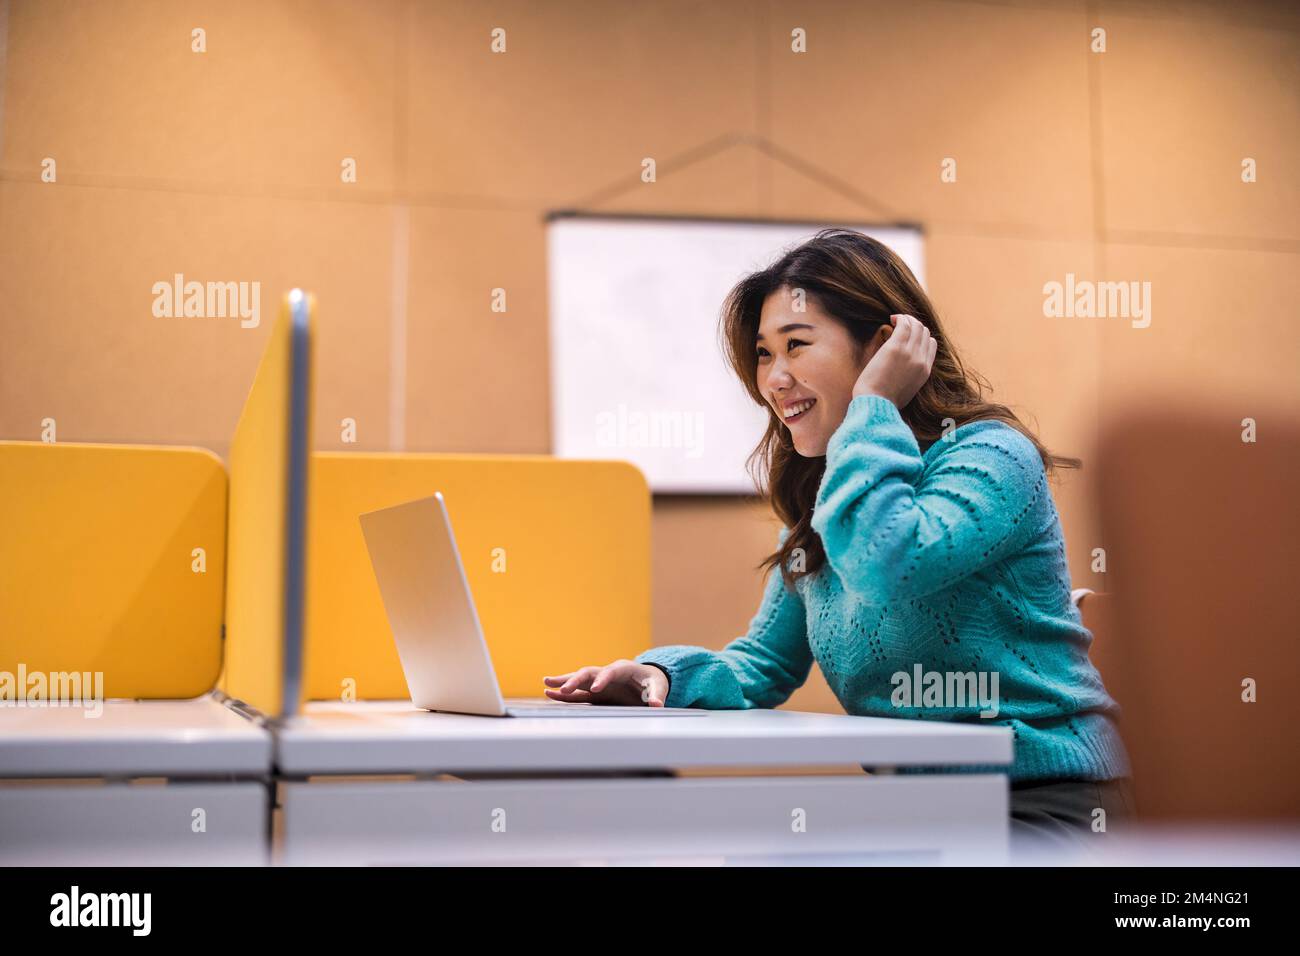 Female student working on laptop in a library cubicle Stock Photo